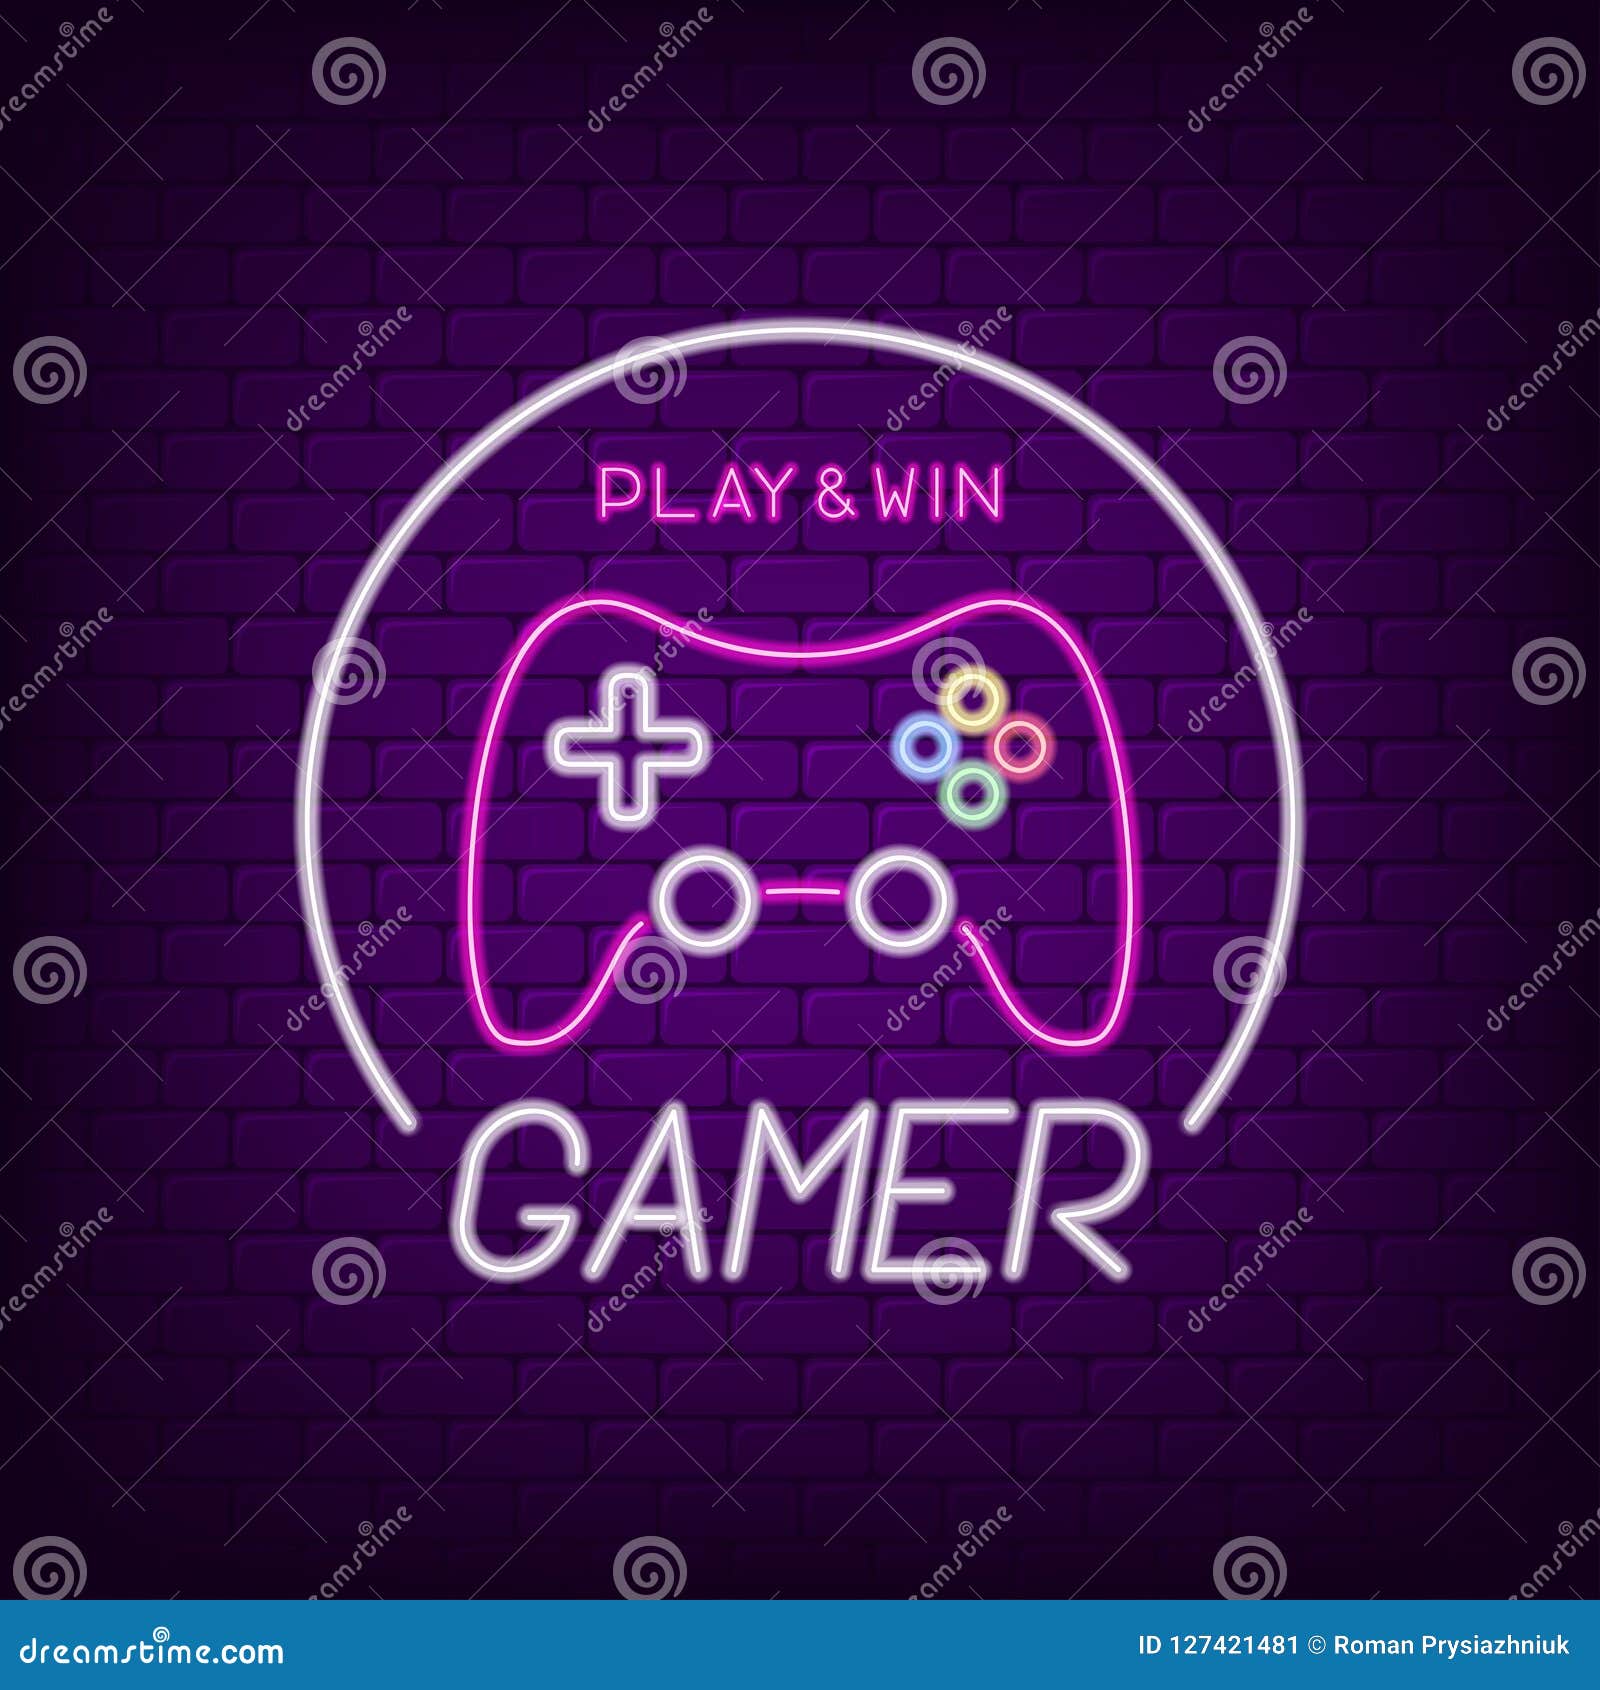 Game controller png images | PNGWing